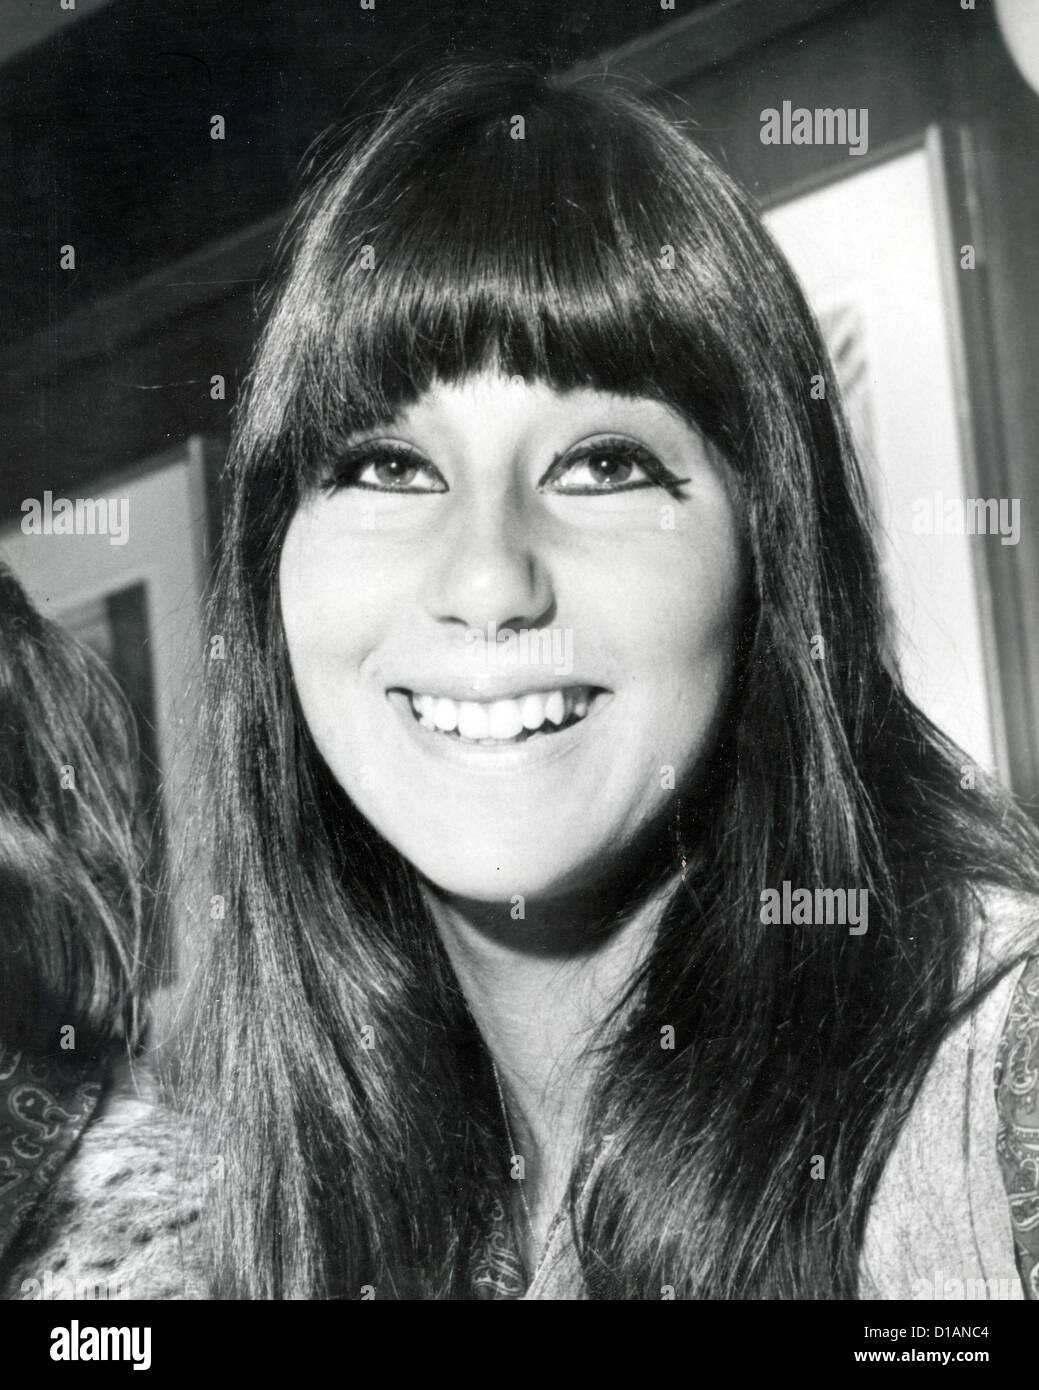 CHER  US singer about 1967 Stock Photo